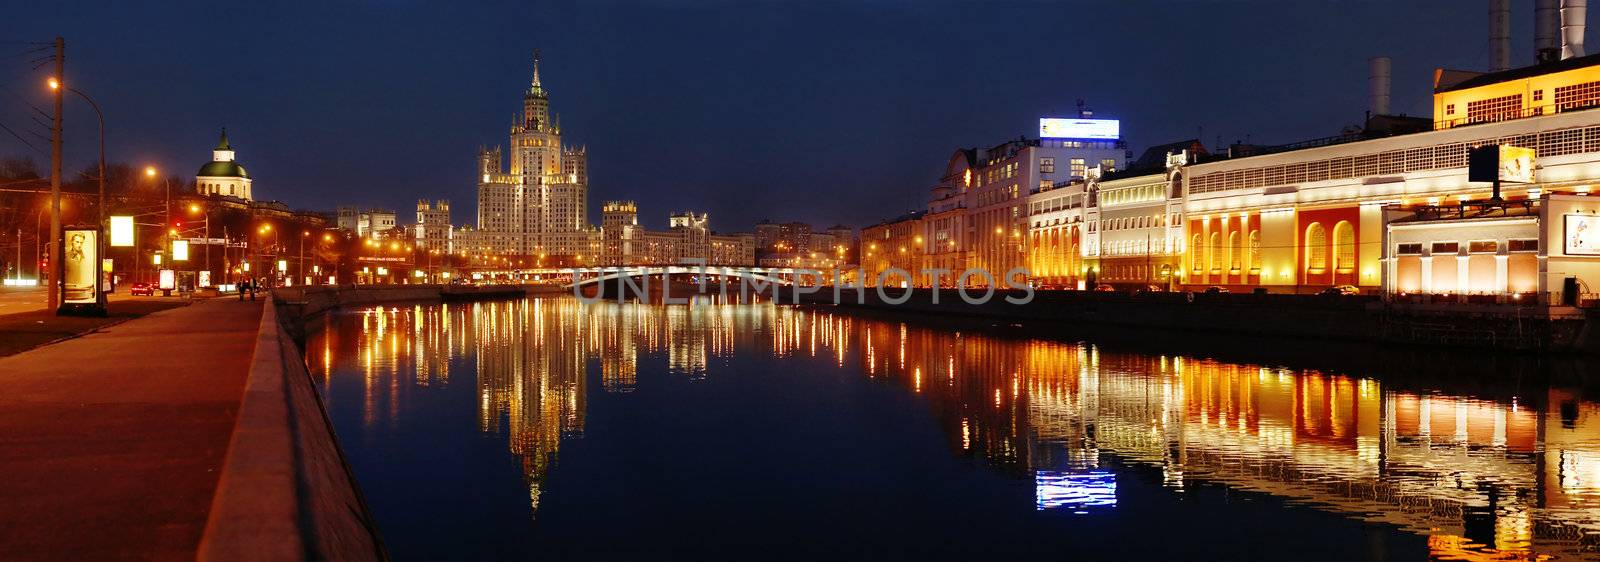 panoramic photo of a night city on a bank of a river